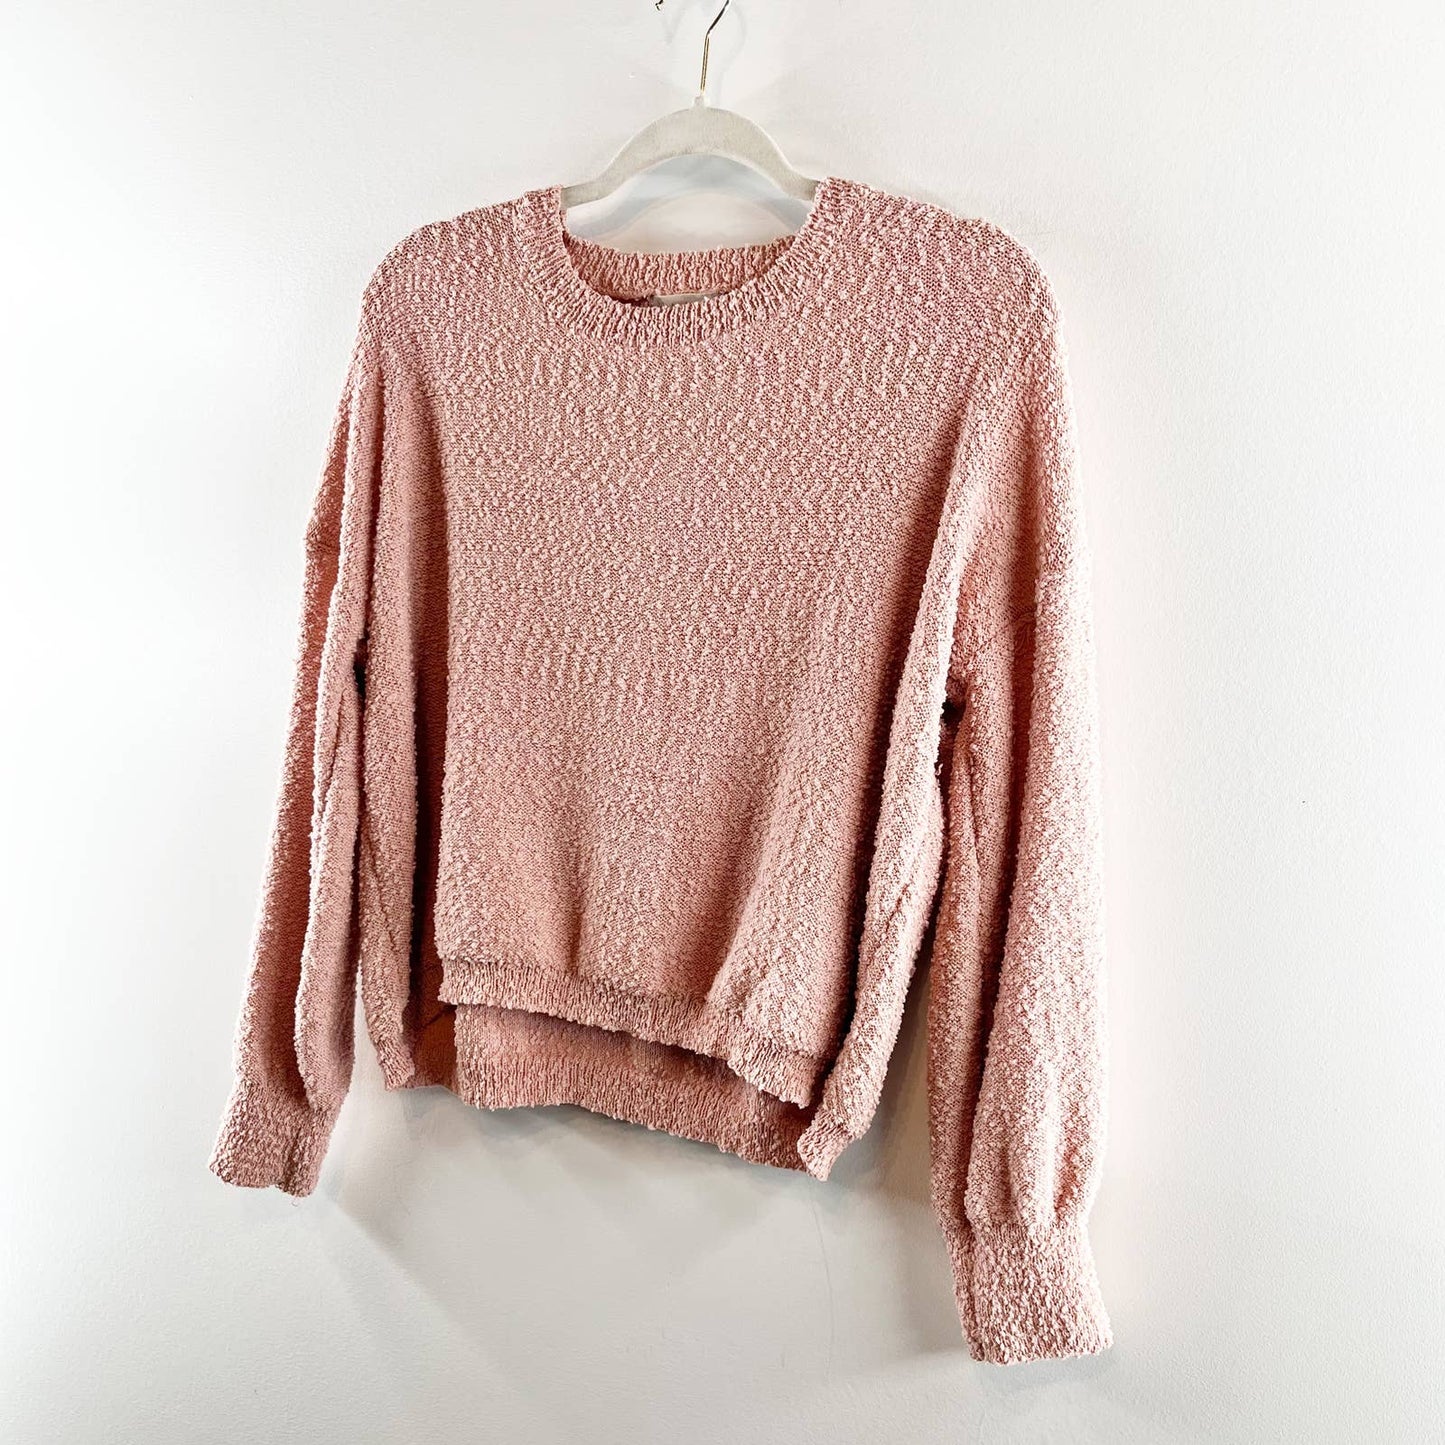 Altar'd State Textured Terry Long Sleeve Crewneck Pullover Sweater Pink XS / S